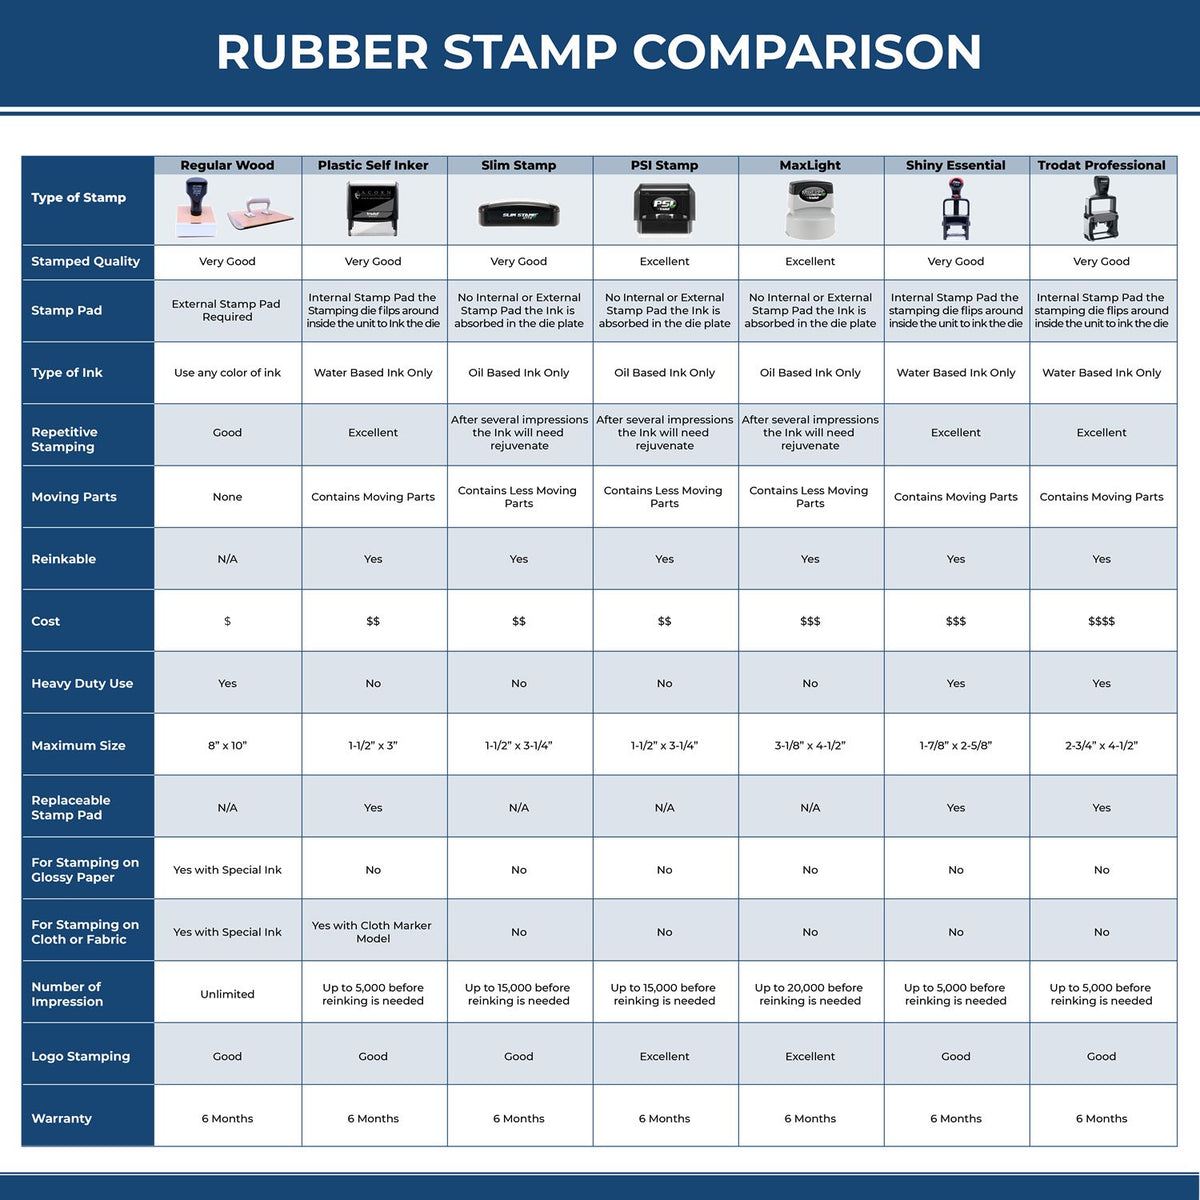 A comparison chart for the different types of mount models available for the PSI Indiana Notary Stamp.